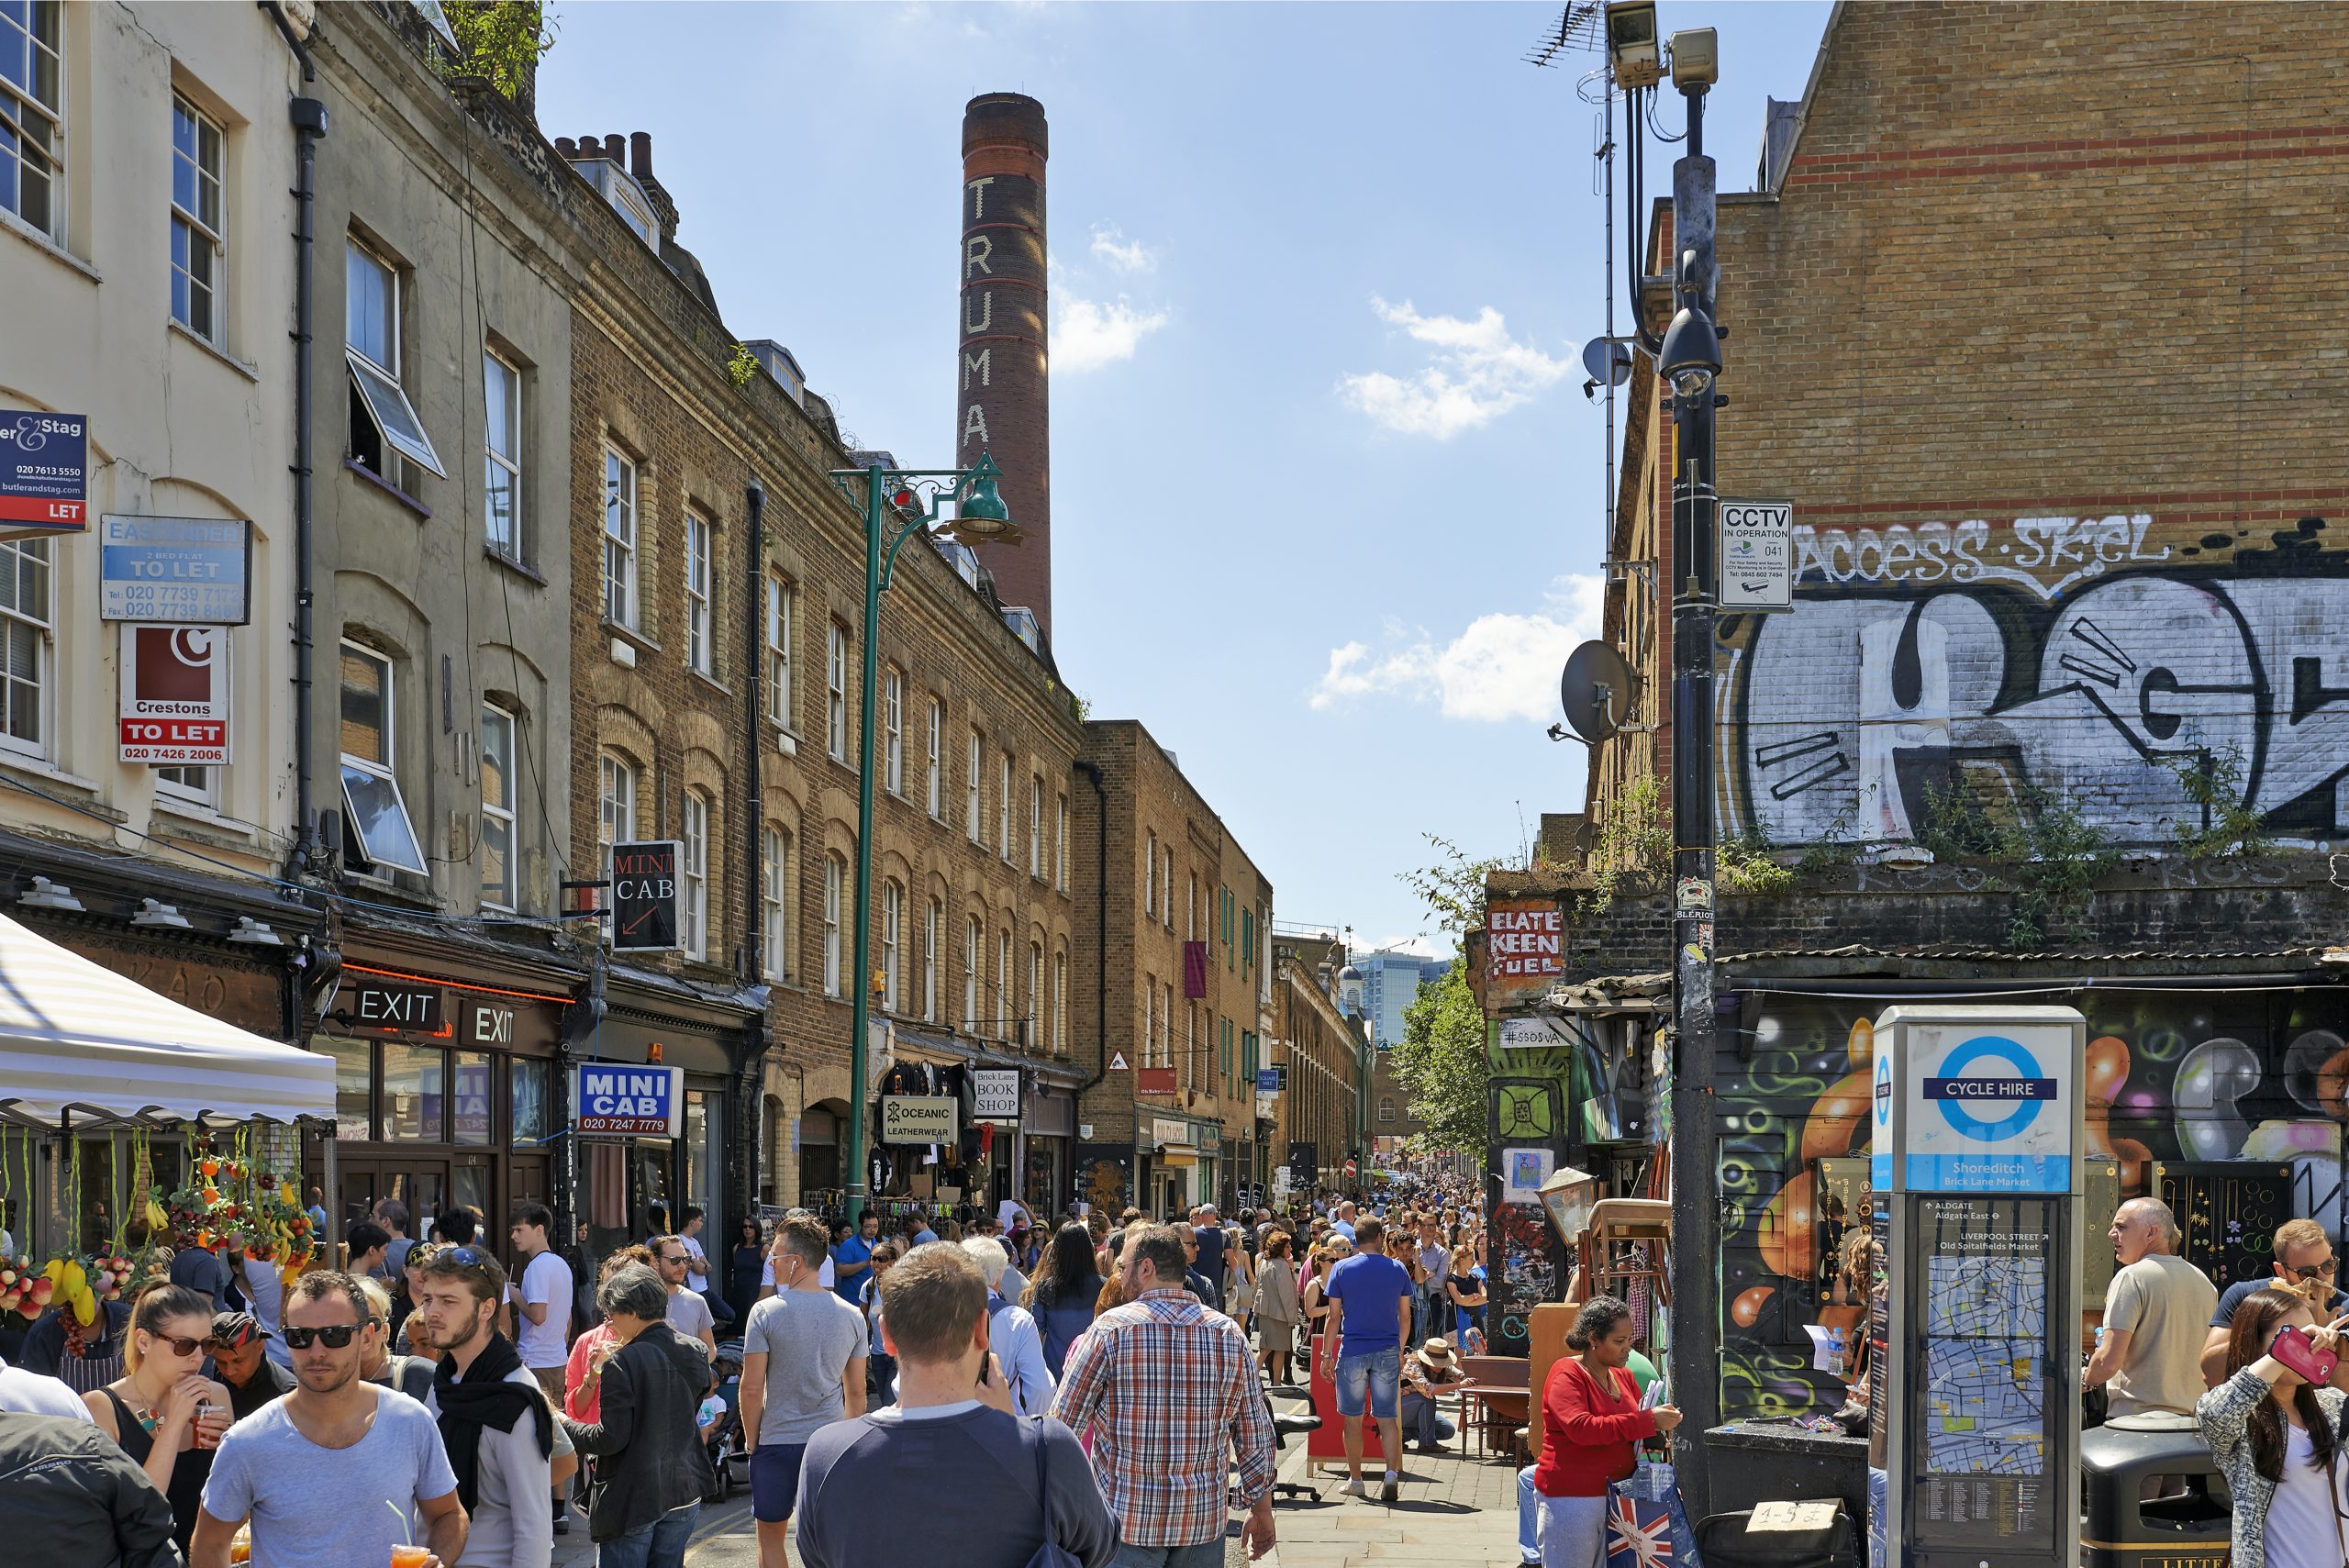 Retail Gazette speaks to experts to discuss the role retailers play in the fine line between regeneration and gentrification and the state of UK high streets post-coronavirus.